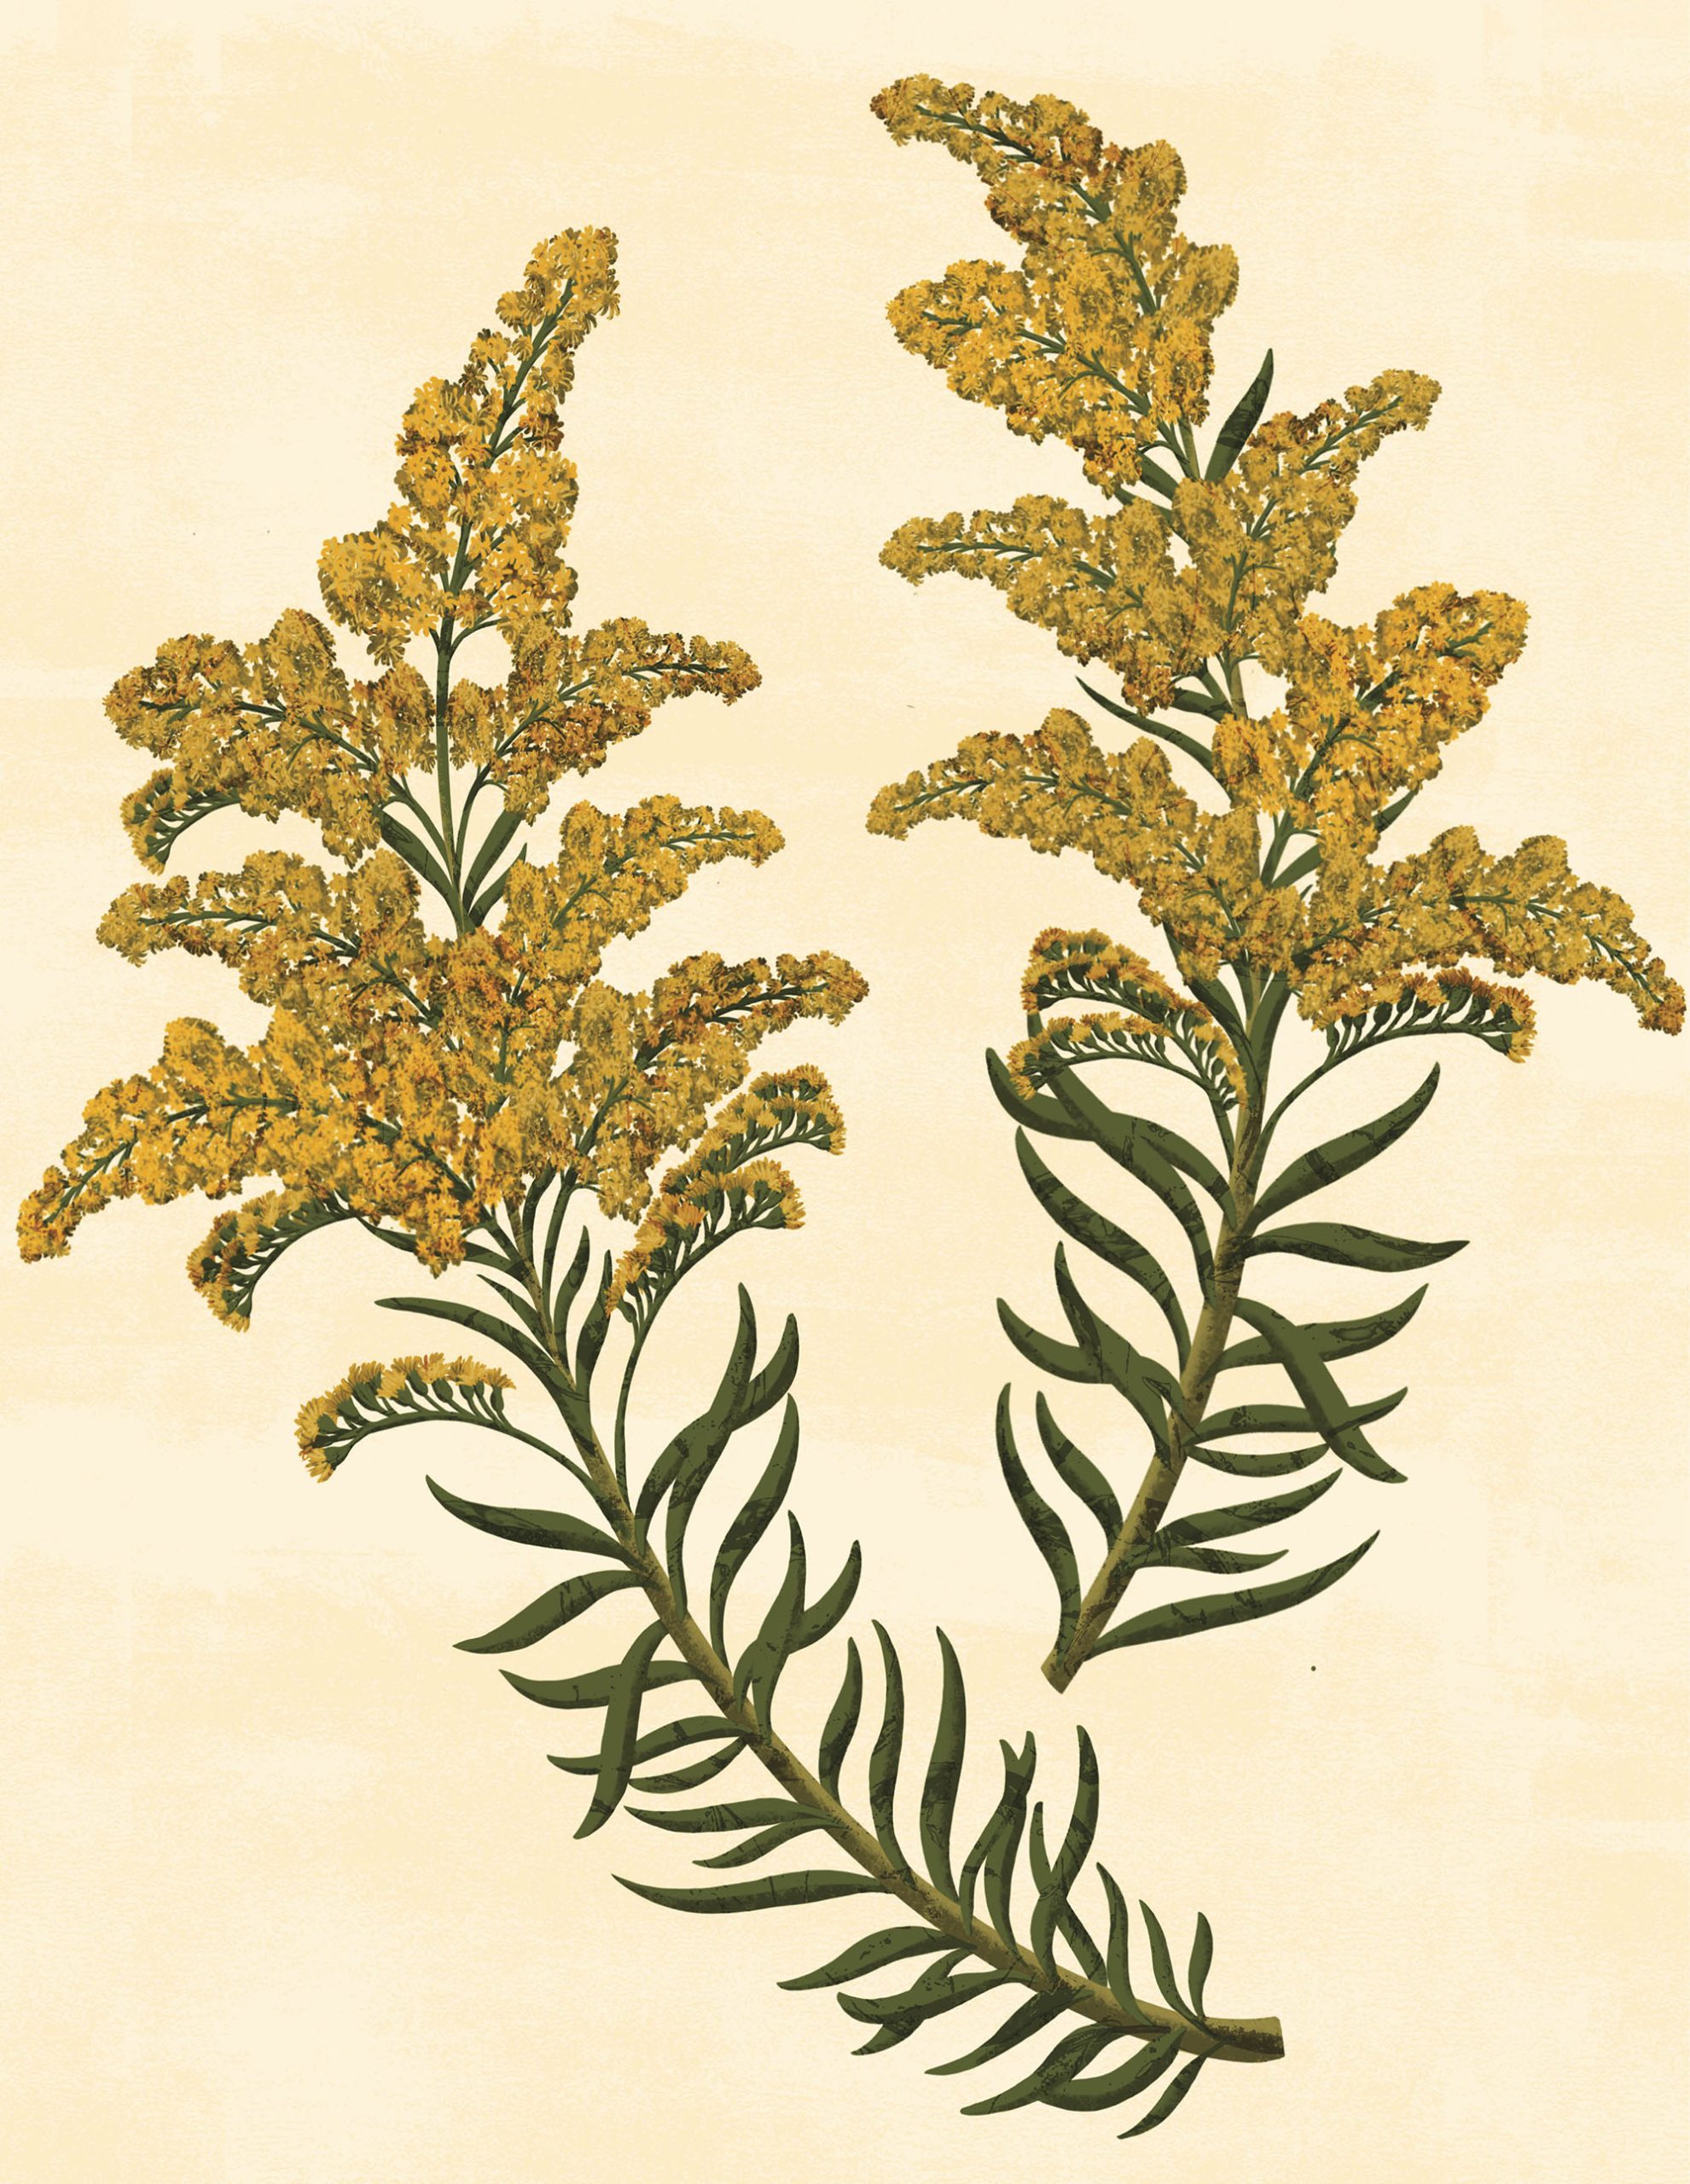 An illustration of yellow goldenrod with green stems